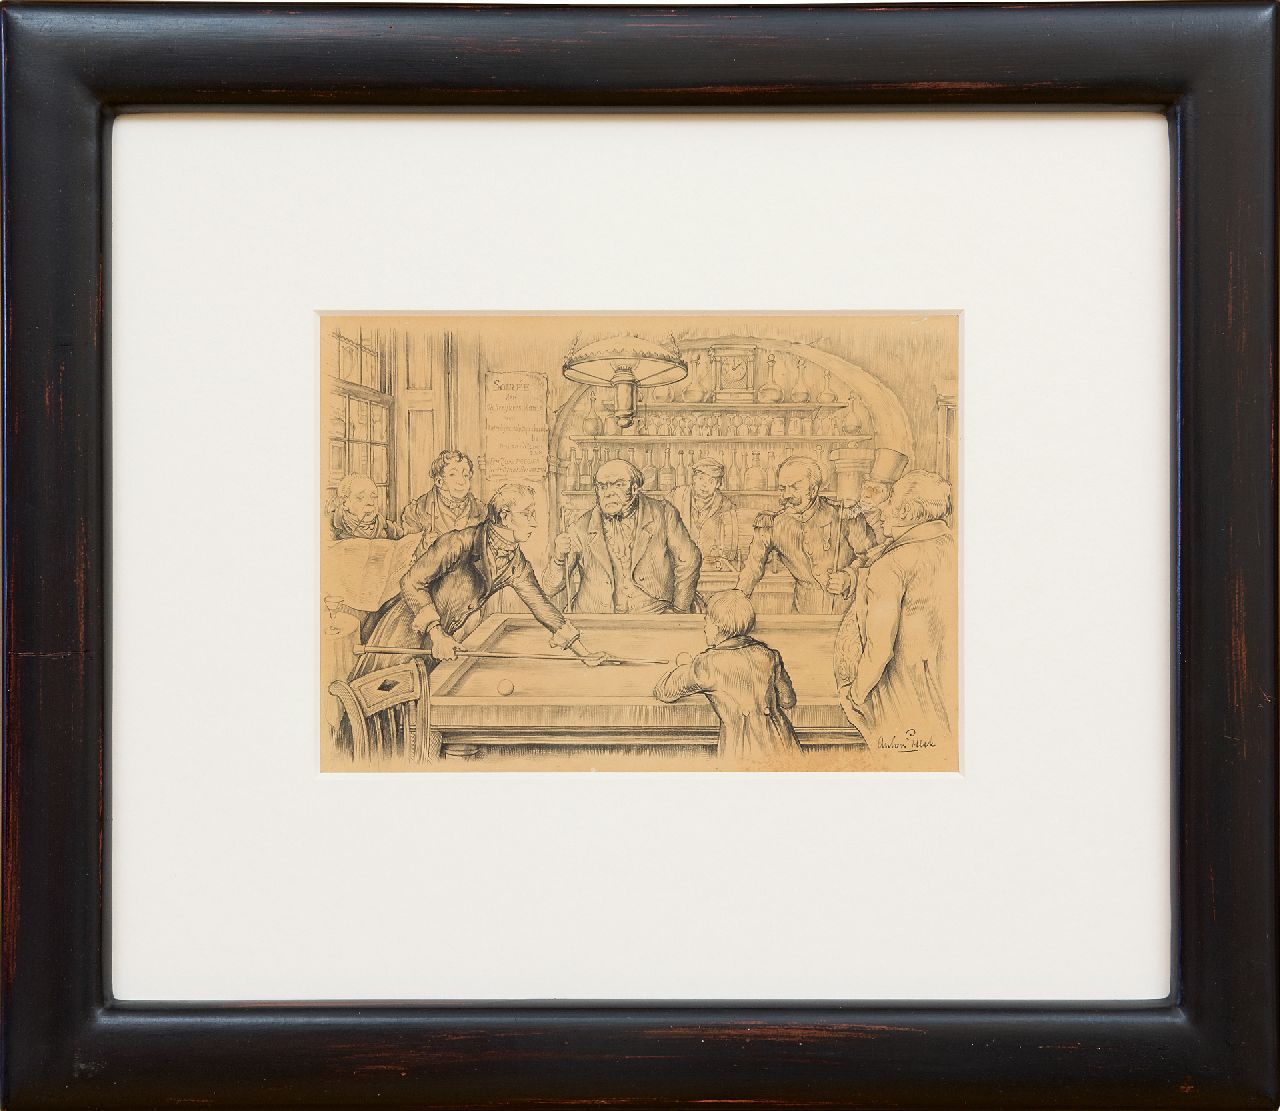 Pieck A.F.  | 'Anton' Franciscus Pieck, Playing billiard, pencil on paper 15.5 x 22.0 cm, signed l.r.